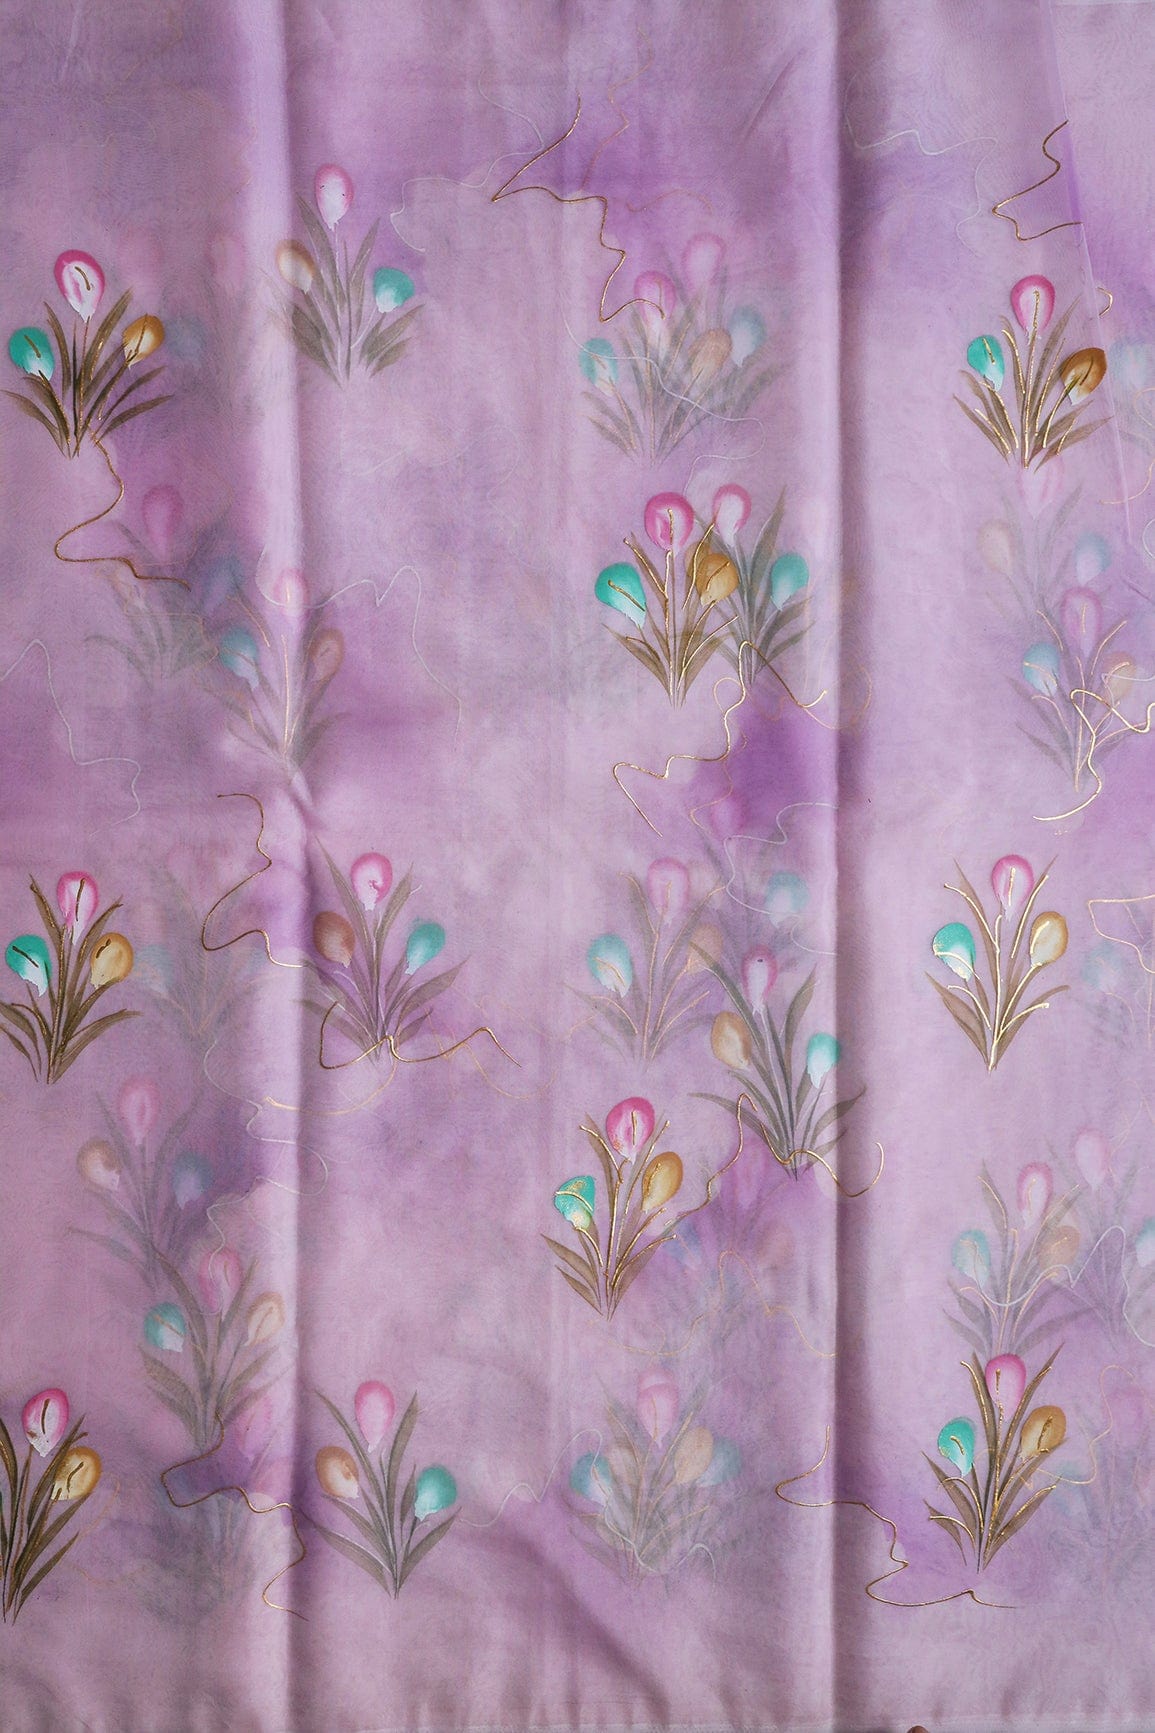 doeraa Embroidery Fabrics Beautiful Floral Hand Painted With Foil Work On Lavender Organza Fabric